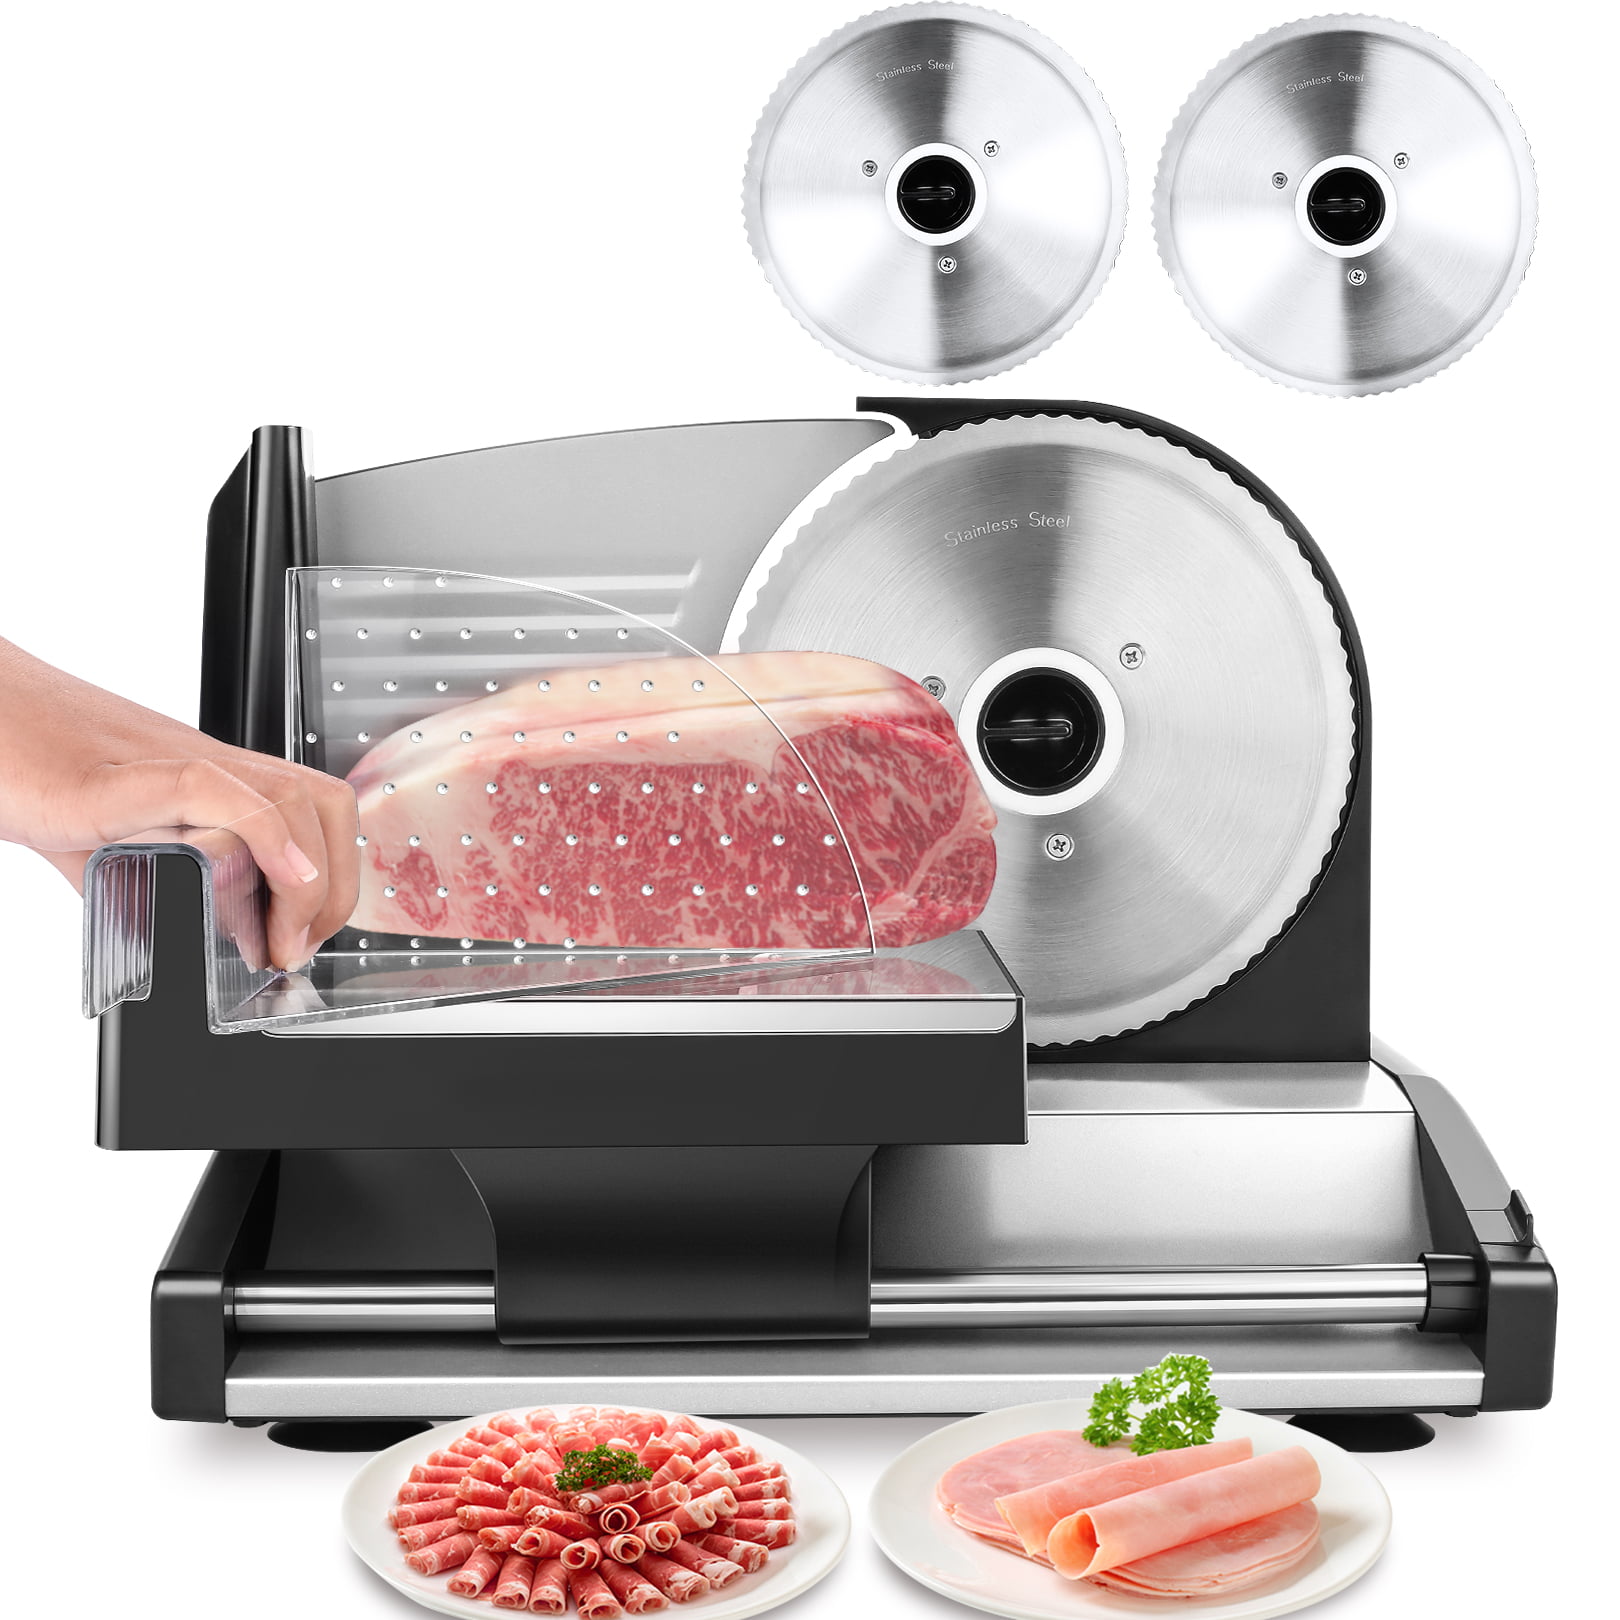 HOME ELECTRIC POWERED POWER FOOD CHEESE DELI MEAT SLICER SLICING MACHINE 